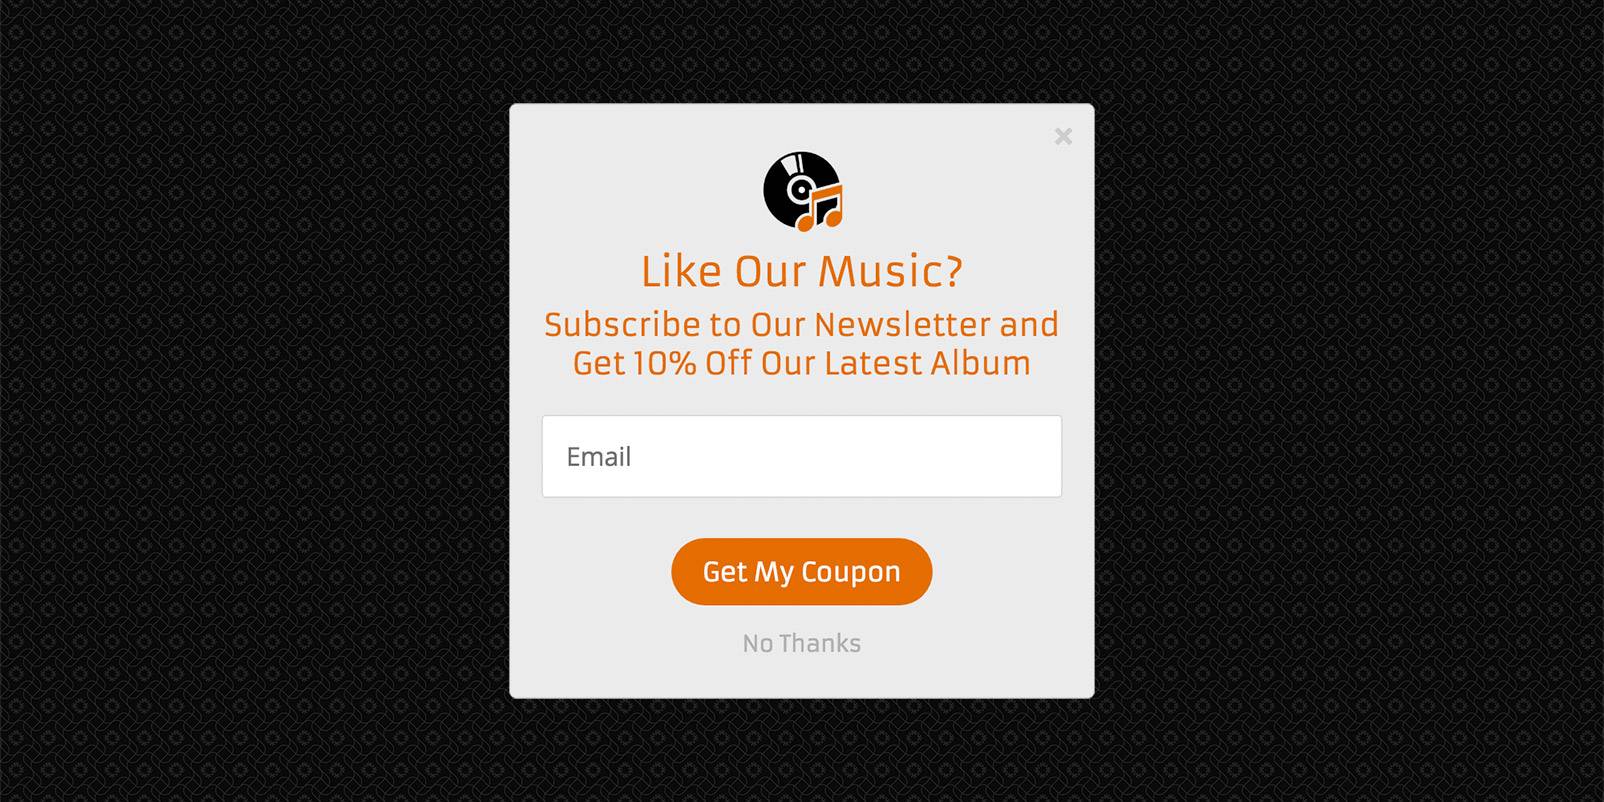 Gleam Capture's newsletter opt-in form for promoting music